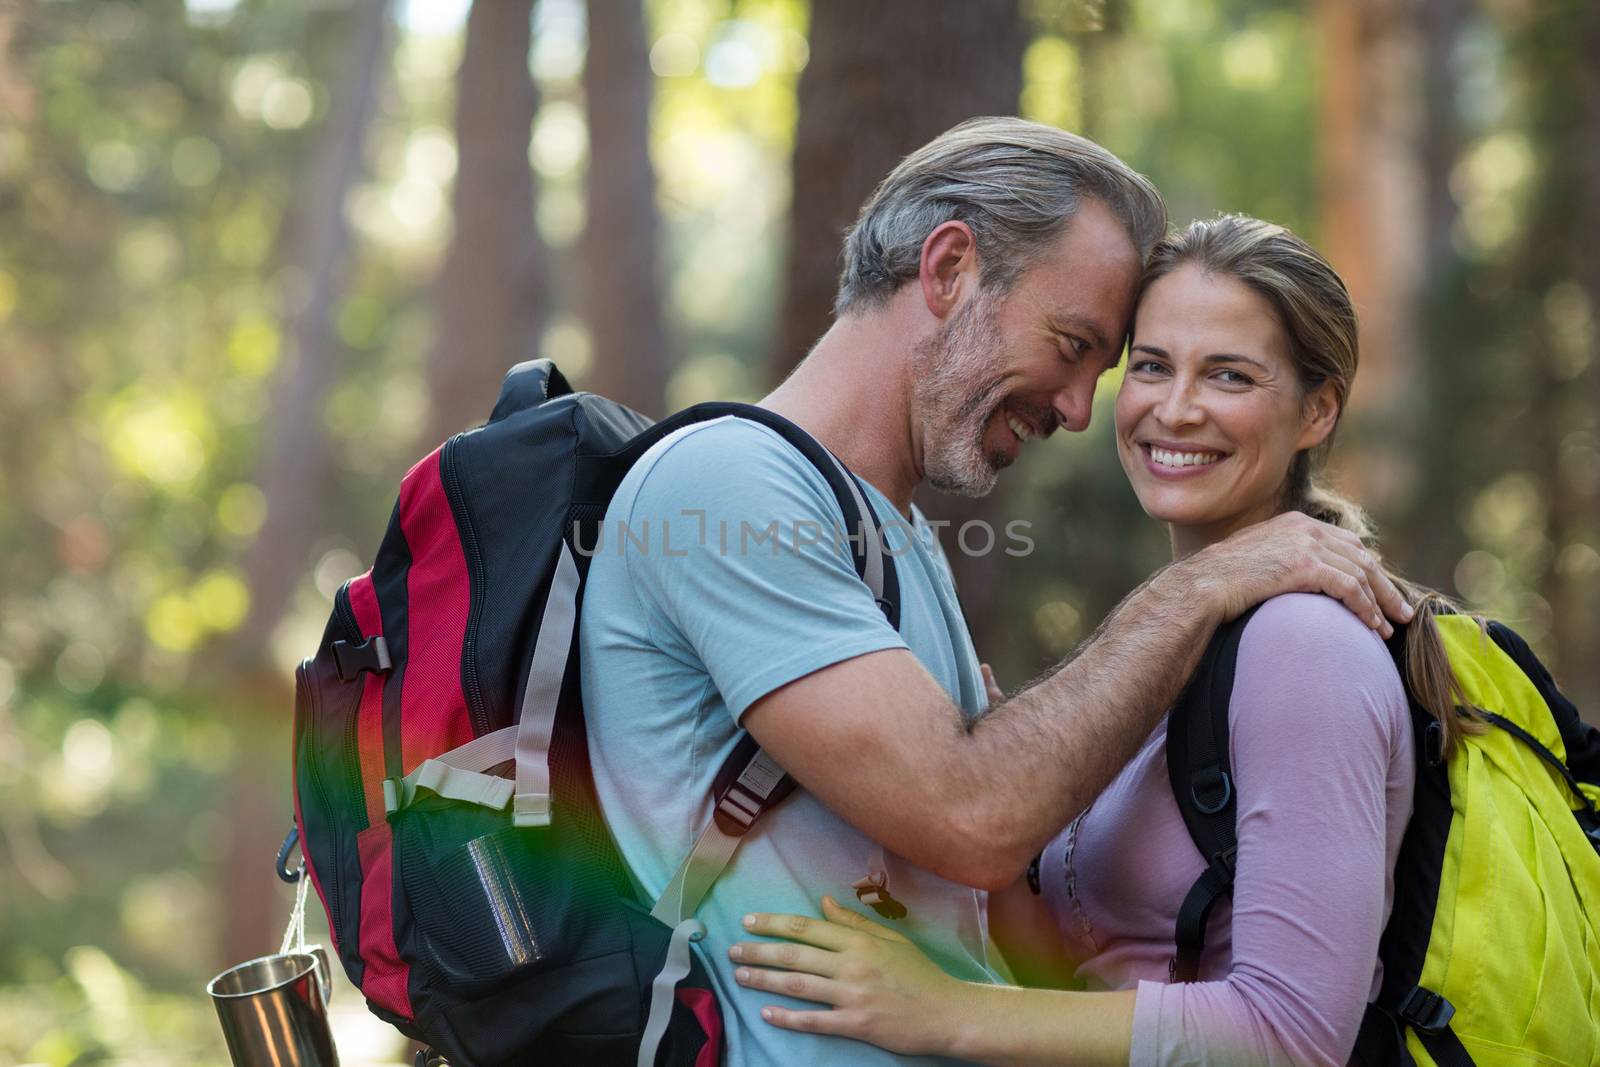 Romantic hiker couple embracing each other in forest